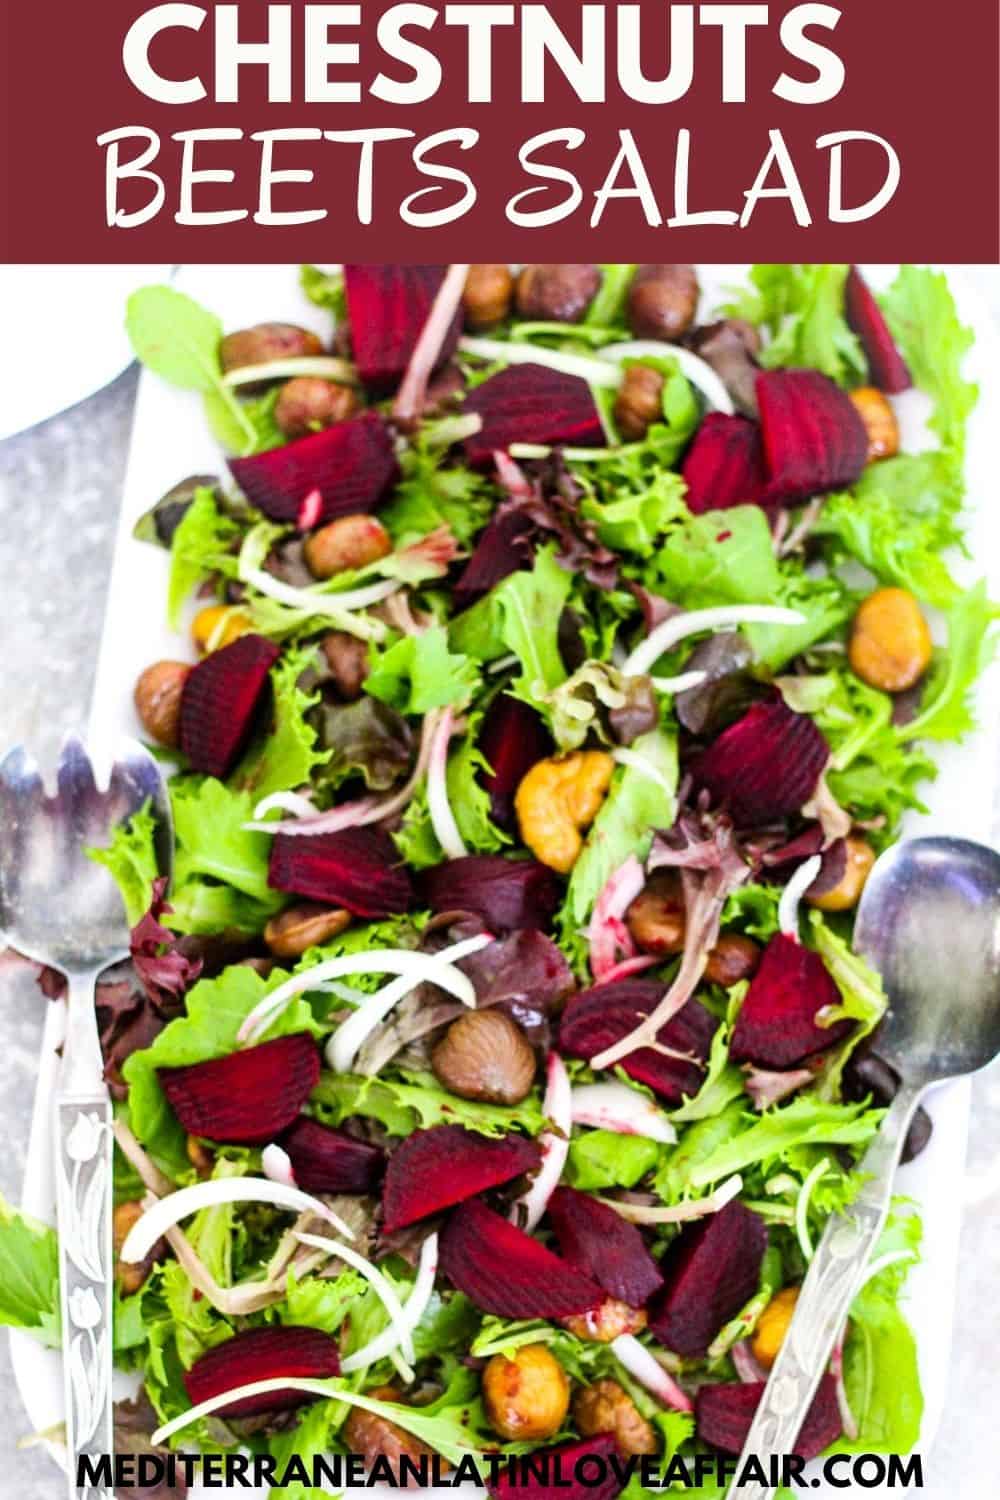 A family style salad with greens, beets and chestnuts. 